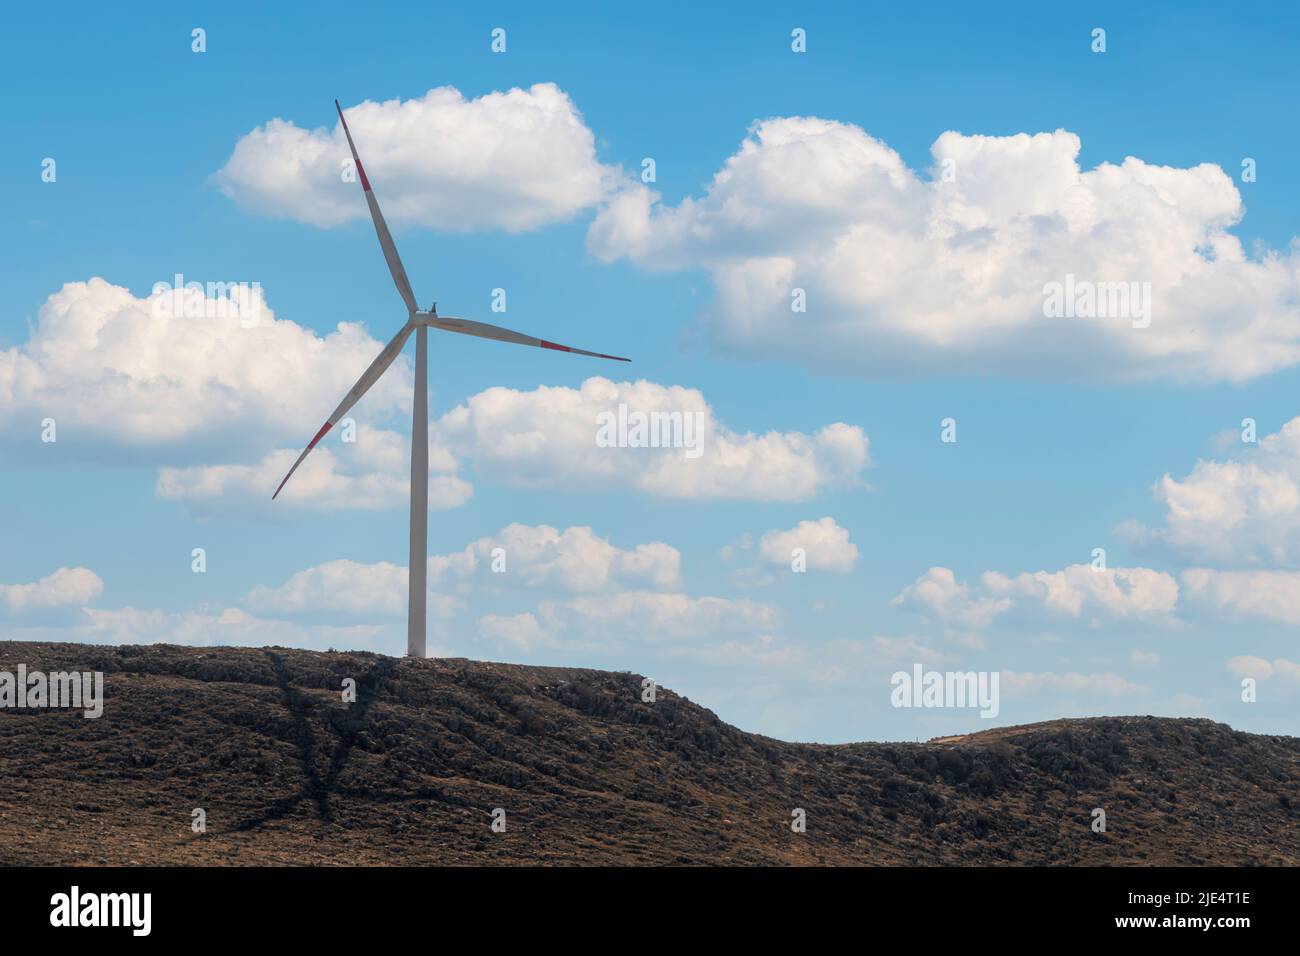 Windmill for renewable electricity generation at sunset Stock Photo